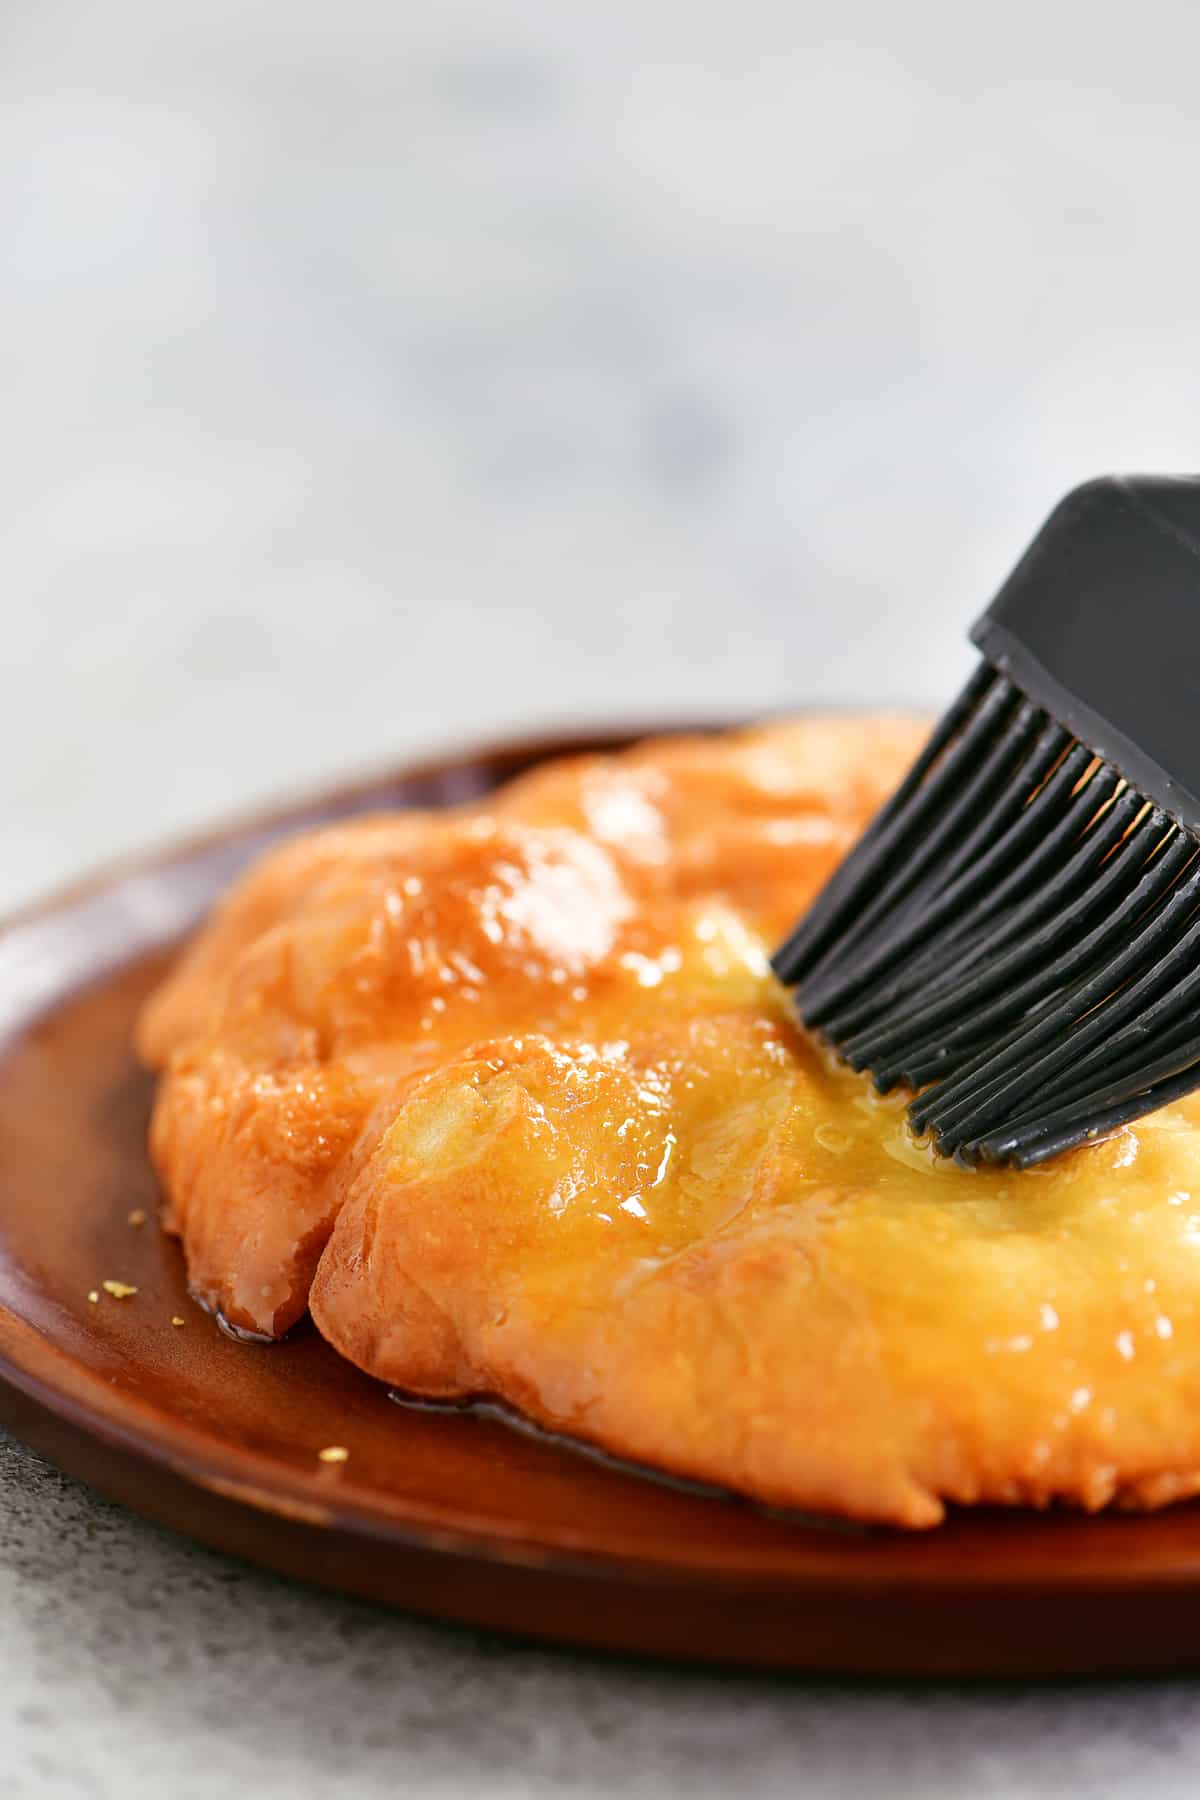 brushing butter on fry bread